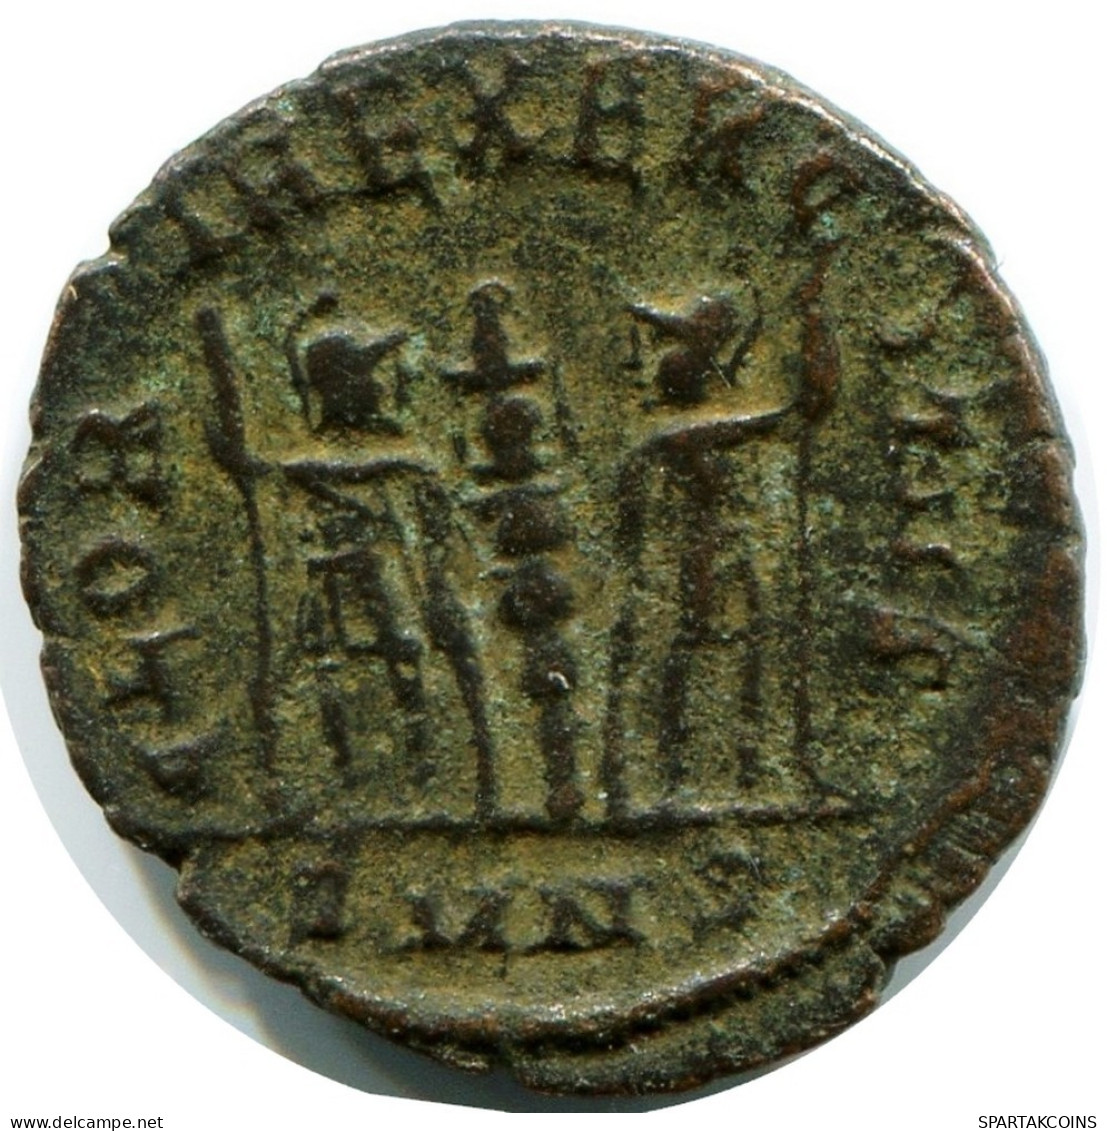 CONSTANS MINTED IN NICOMEDIA FOUND IN IHNASYAH HOARD EGYPT #ANC11738.14.D.A - El Imperio Christiano (307 / 363)